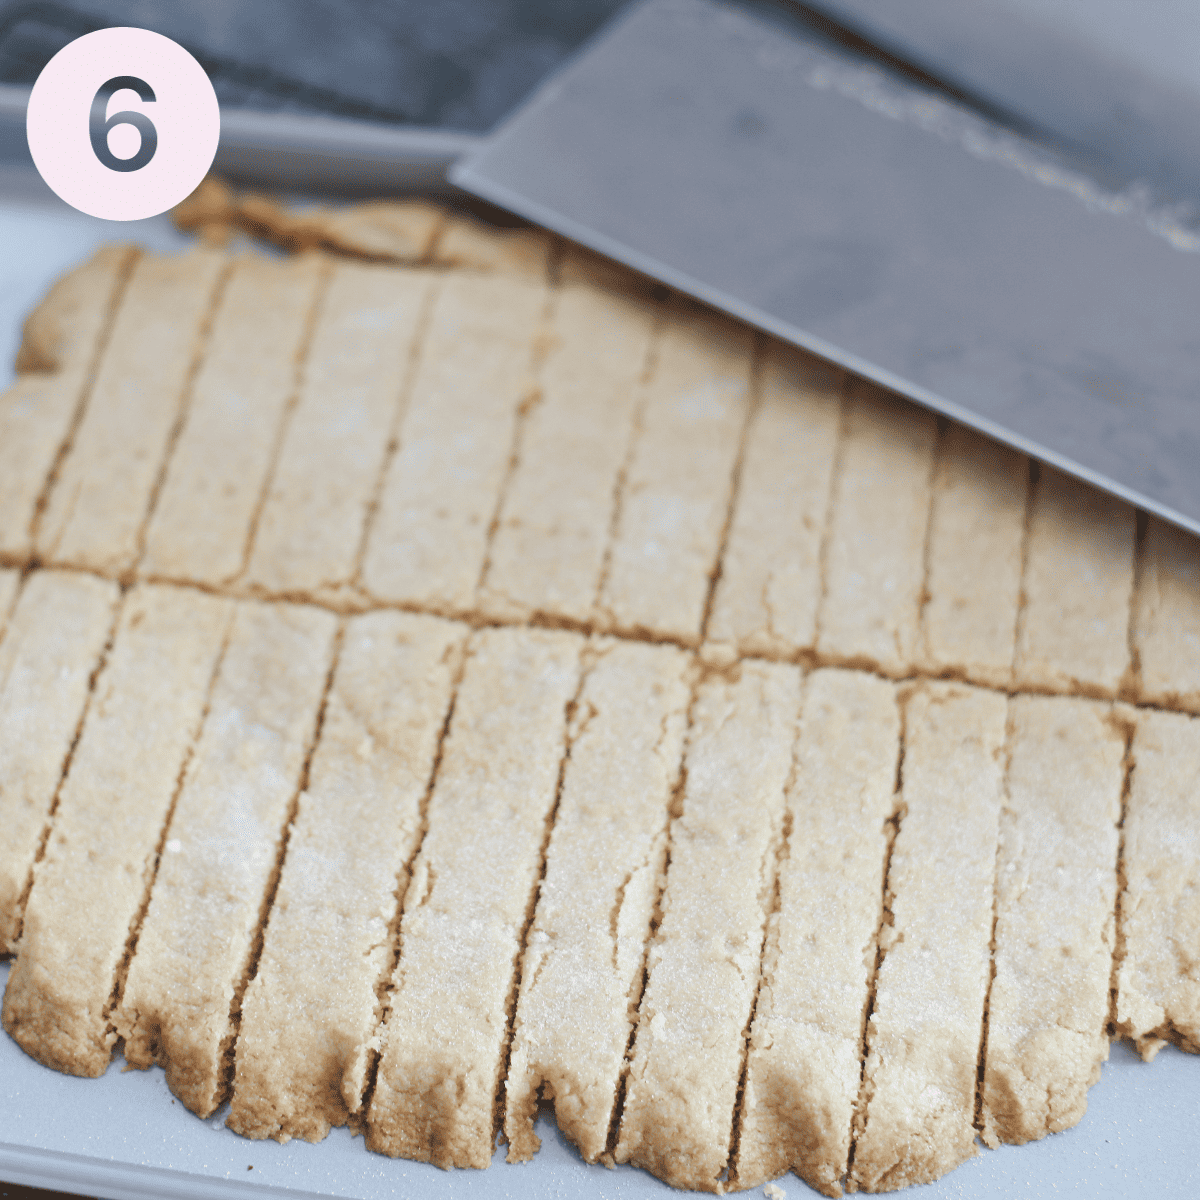 Cutting shortbread into fingers.